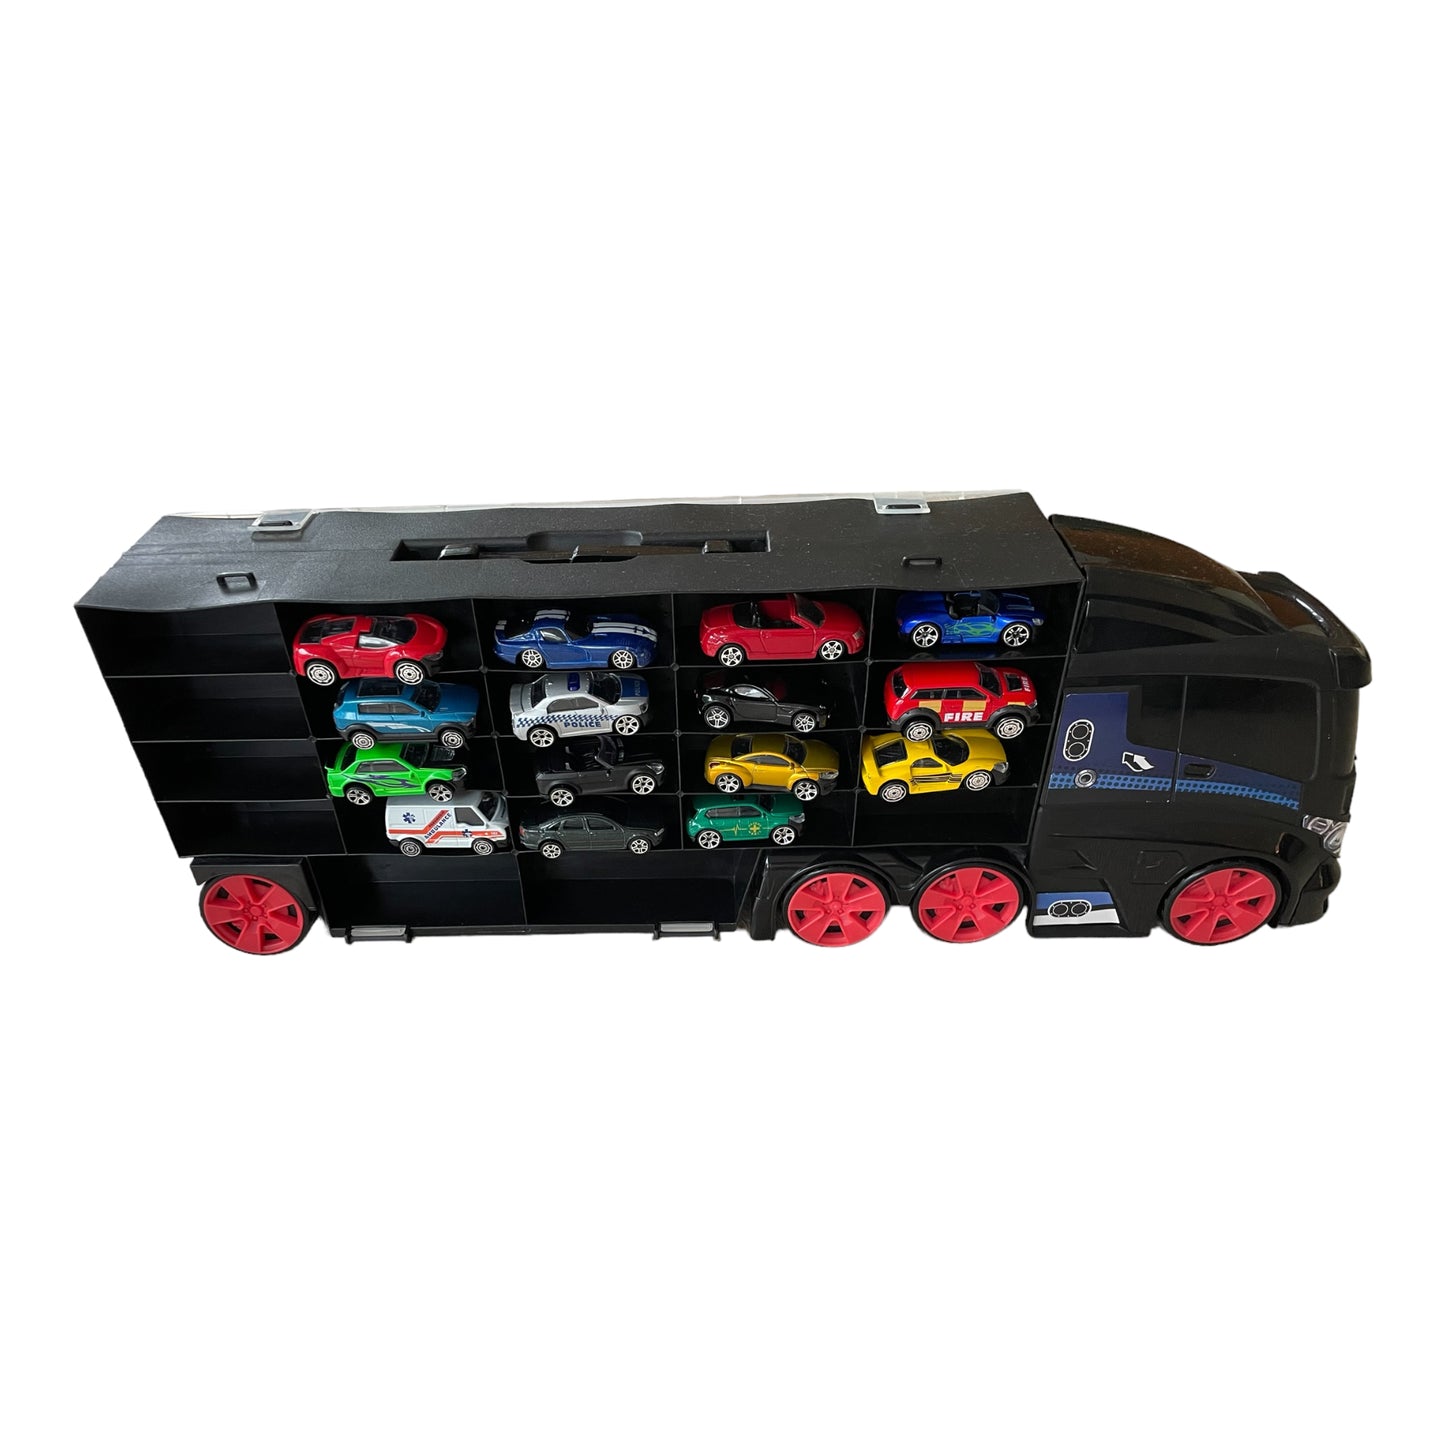 Teamsterz Truck Carry Case with 23 cars - Transporter carry case